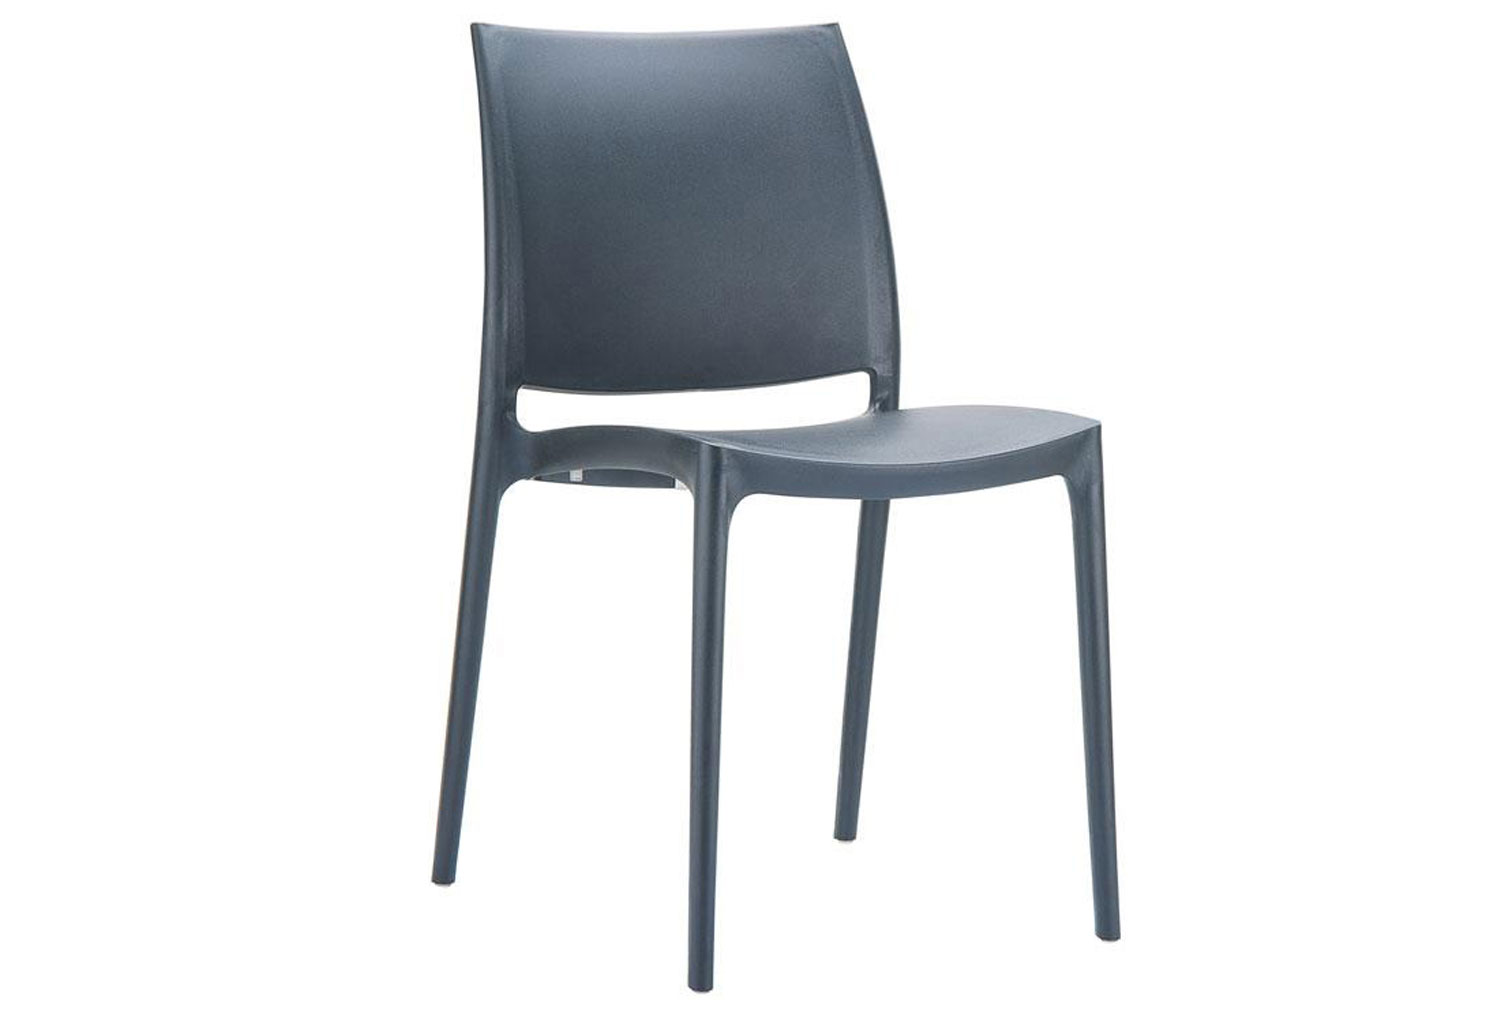 Qty 2 - Sugarloaf Stacking Side Chair, Grey